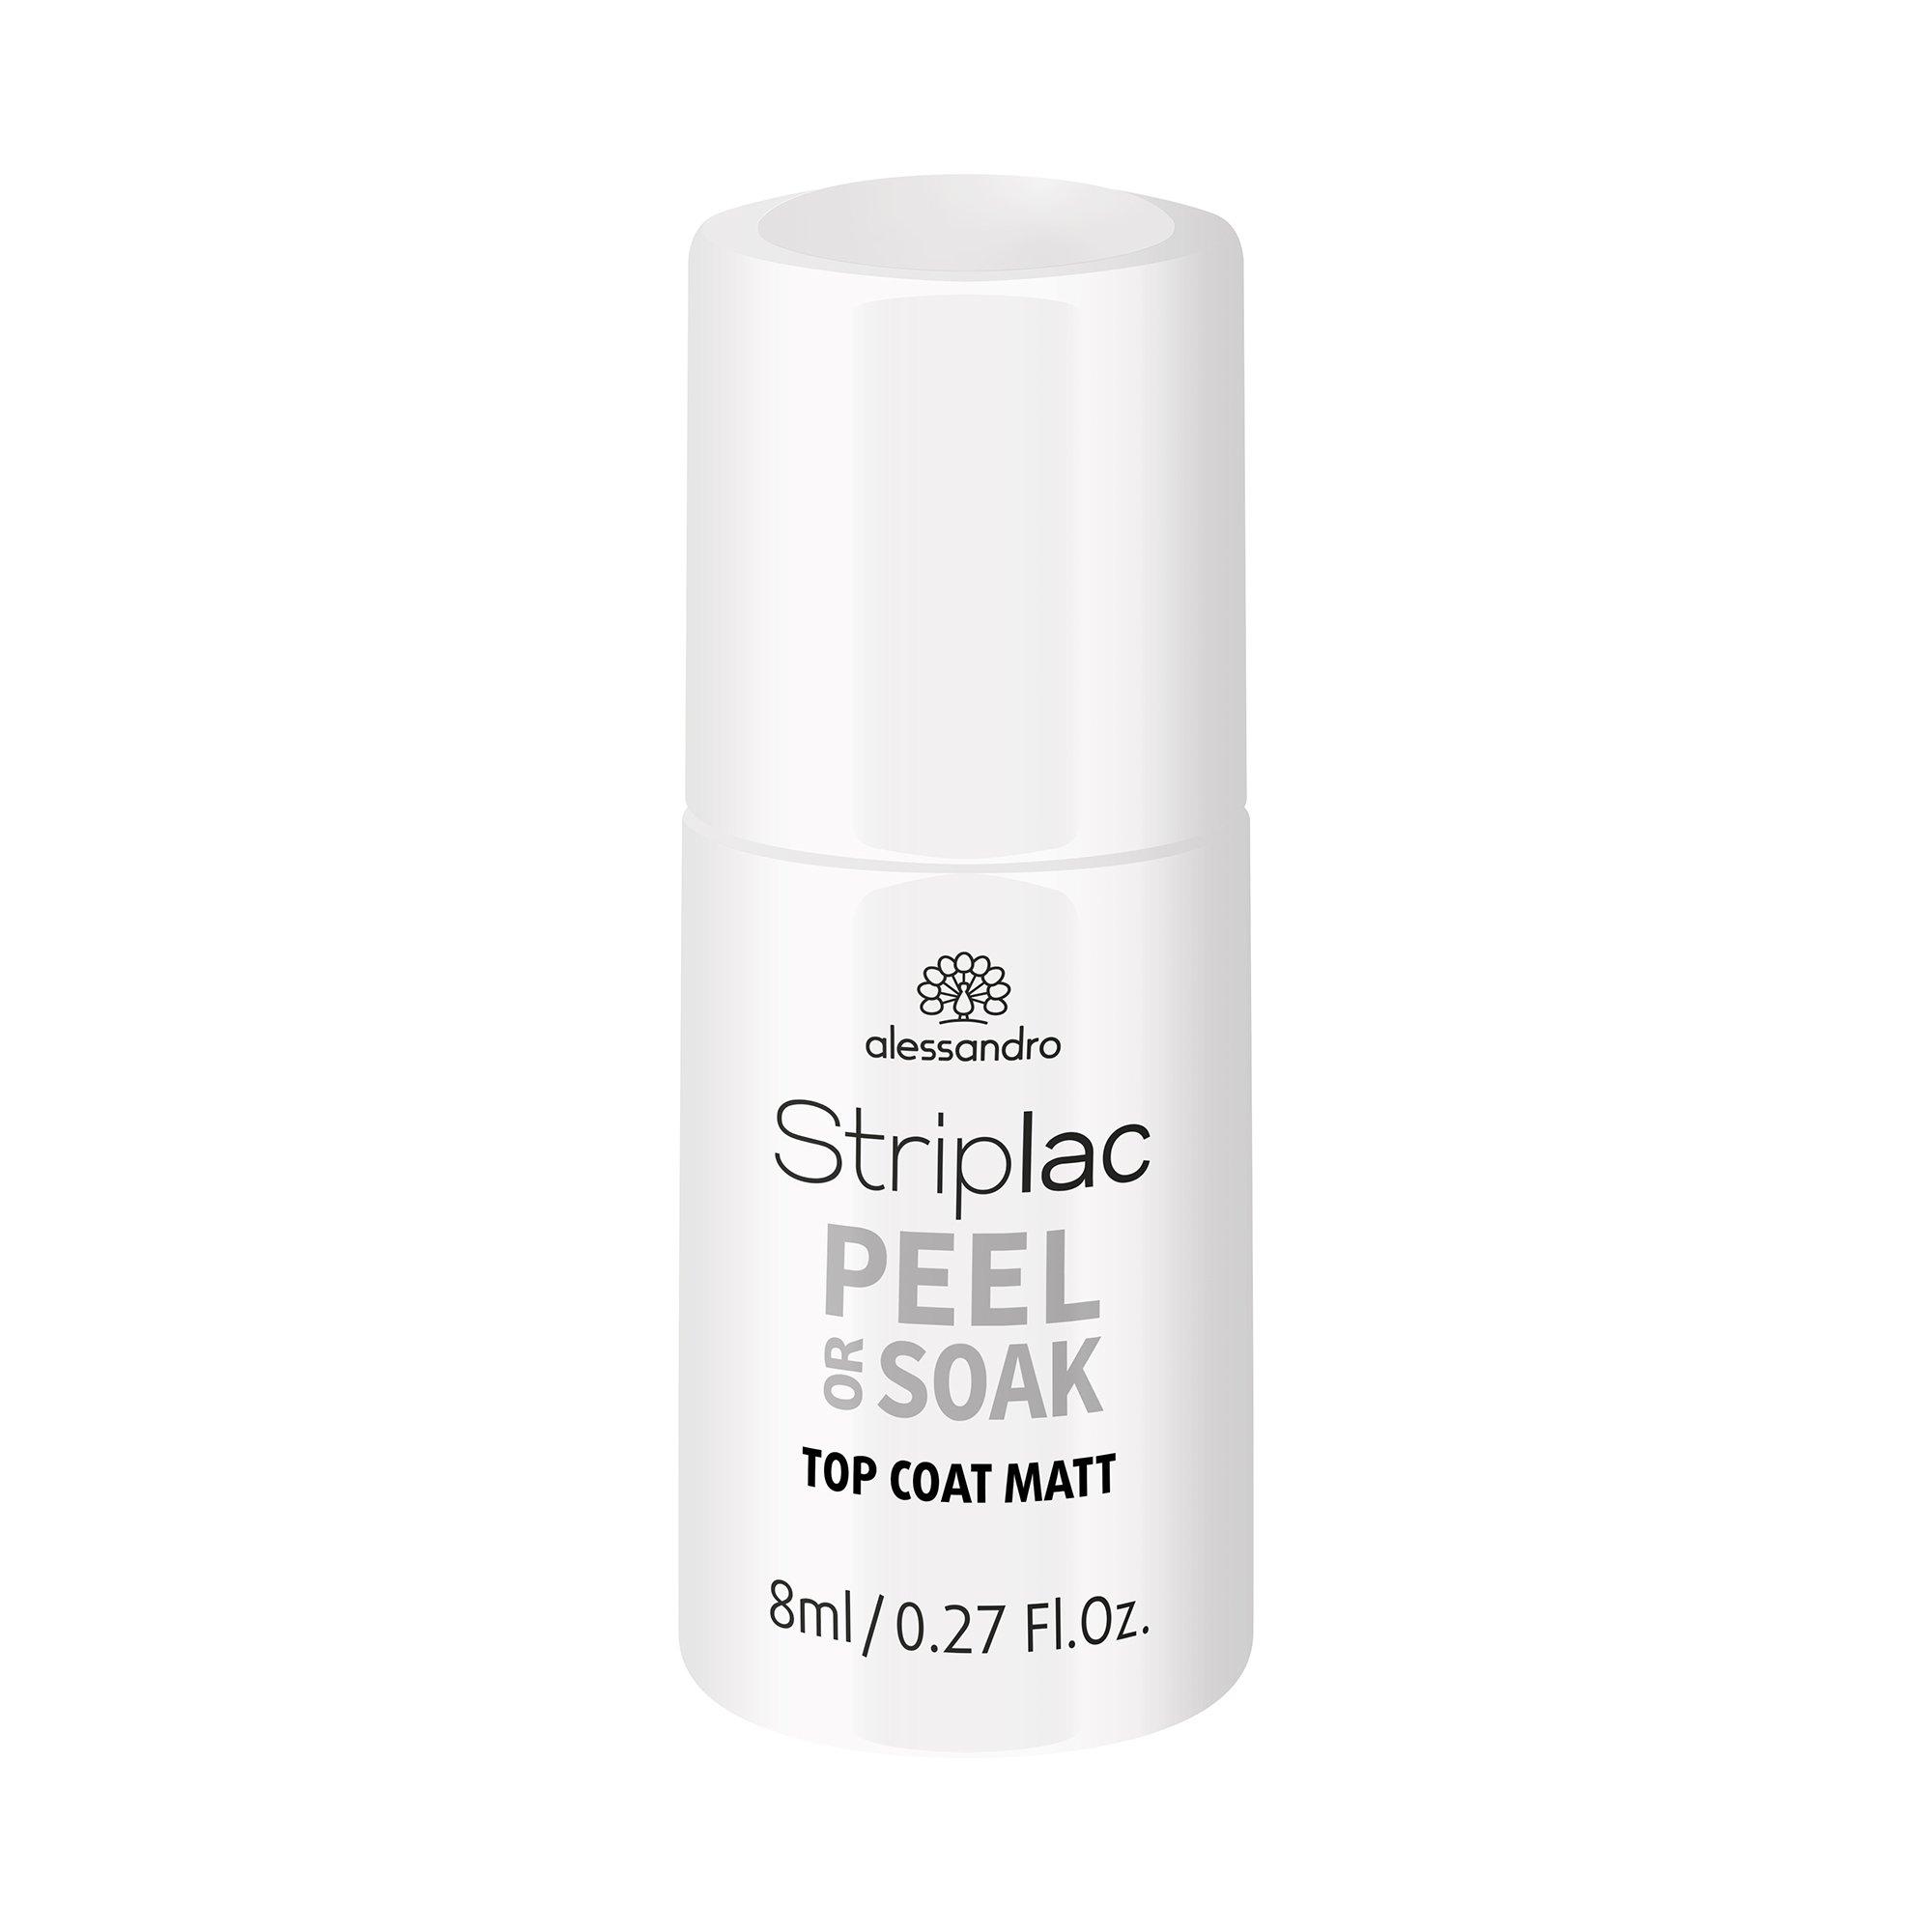 Image of alessandro Striplac 2.0 Top Coat